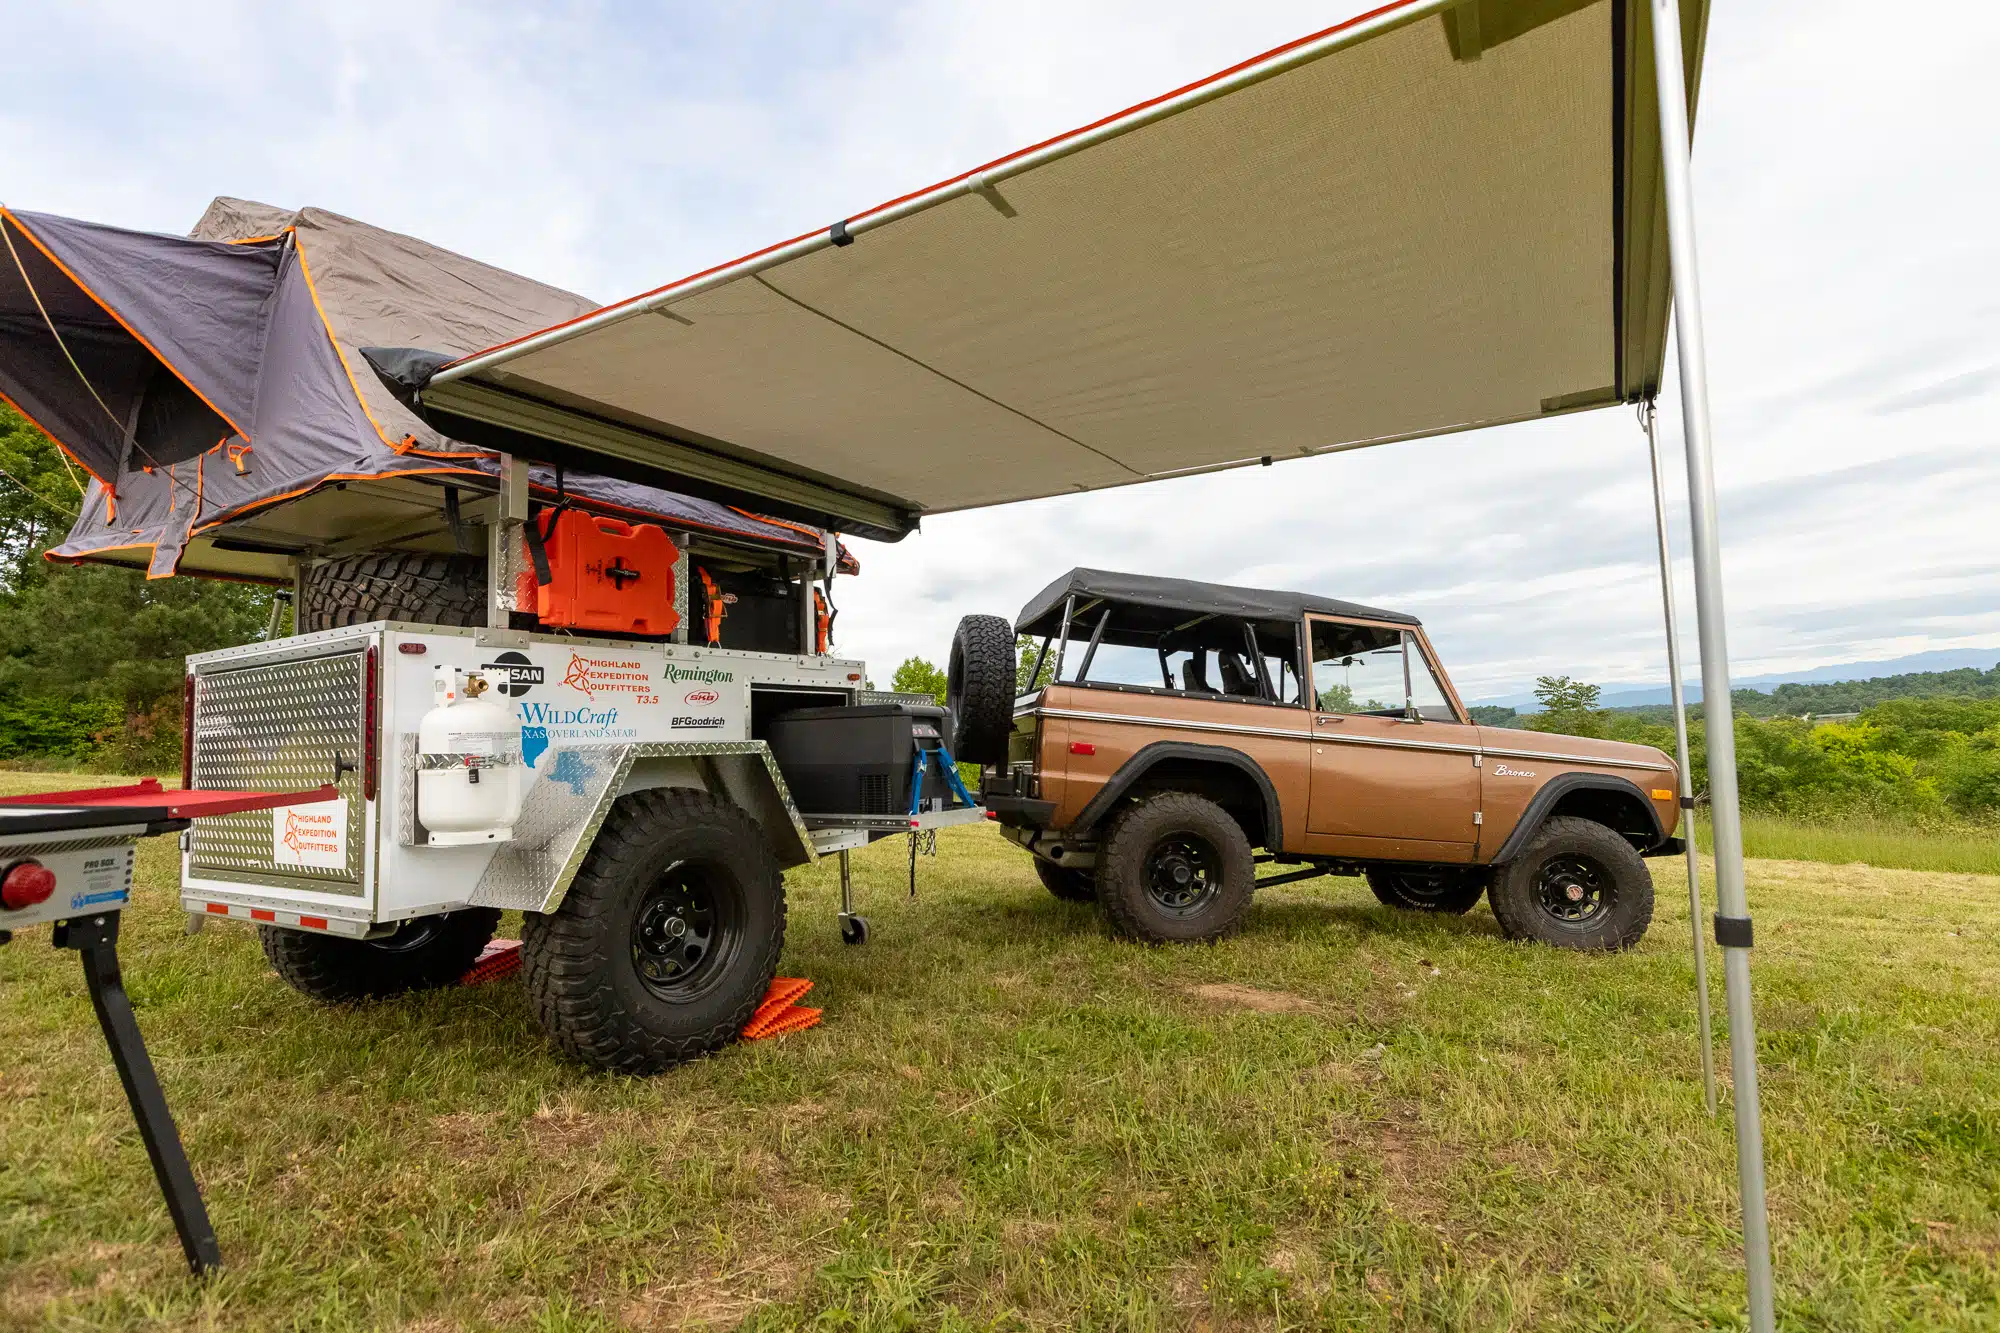 Early Bronco is perfect for camping in the mountains and with the Kincer Chassis upgrades it tows like a dream